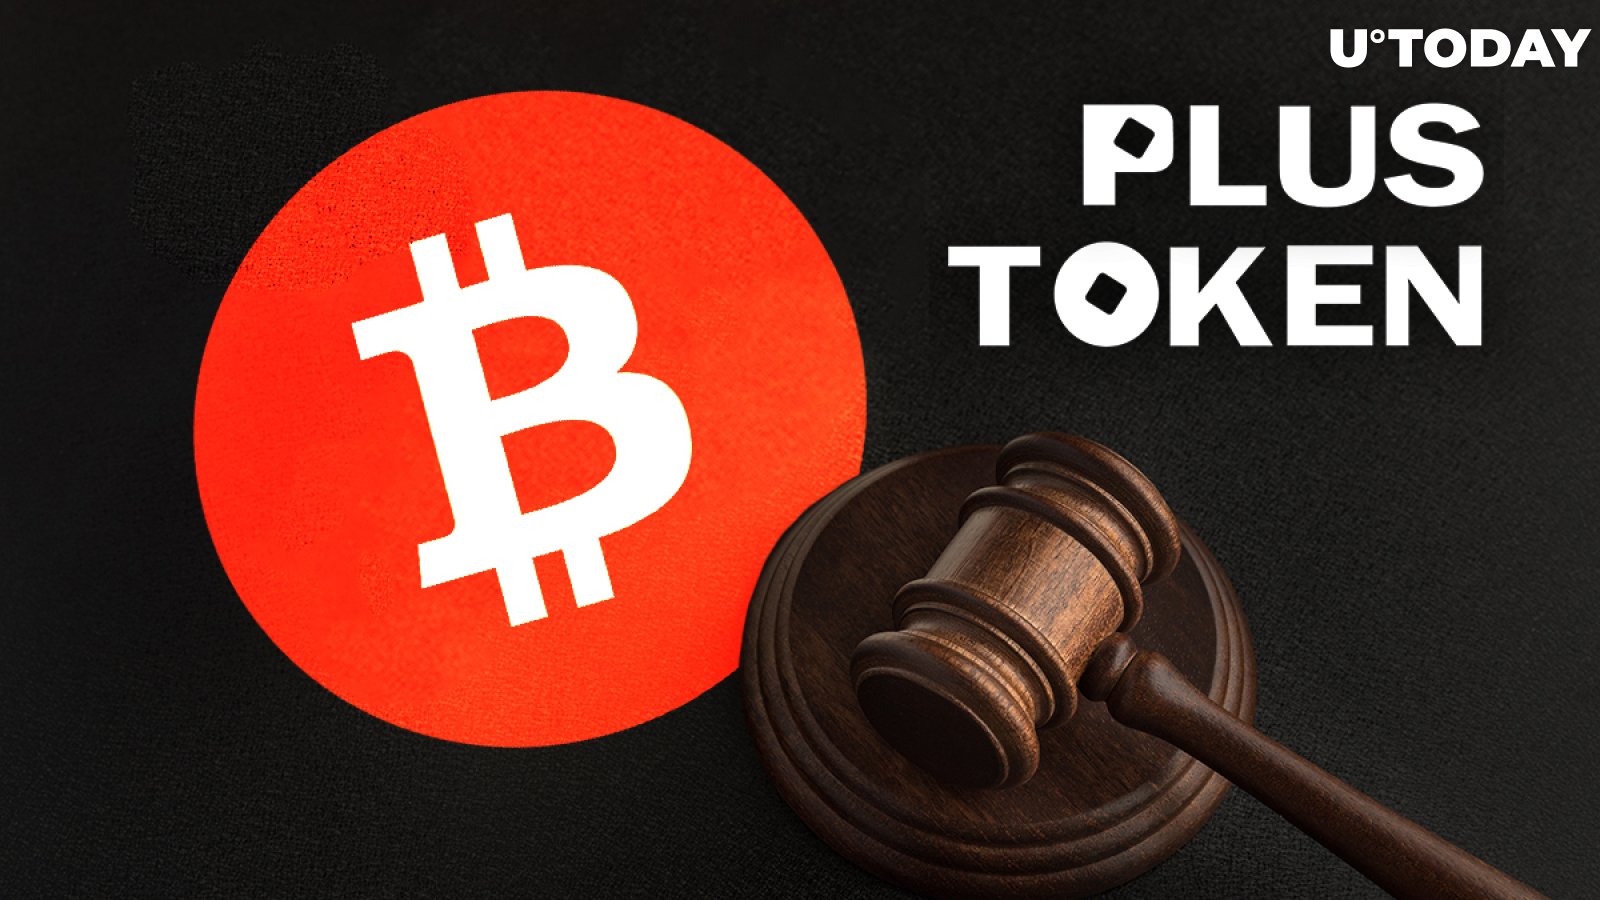 Bitcoin Confiscated from PlusToken Was Likely Sold by China: Colin Wu